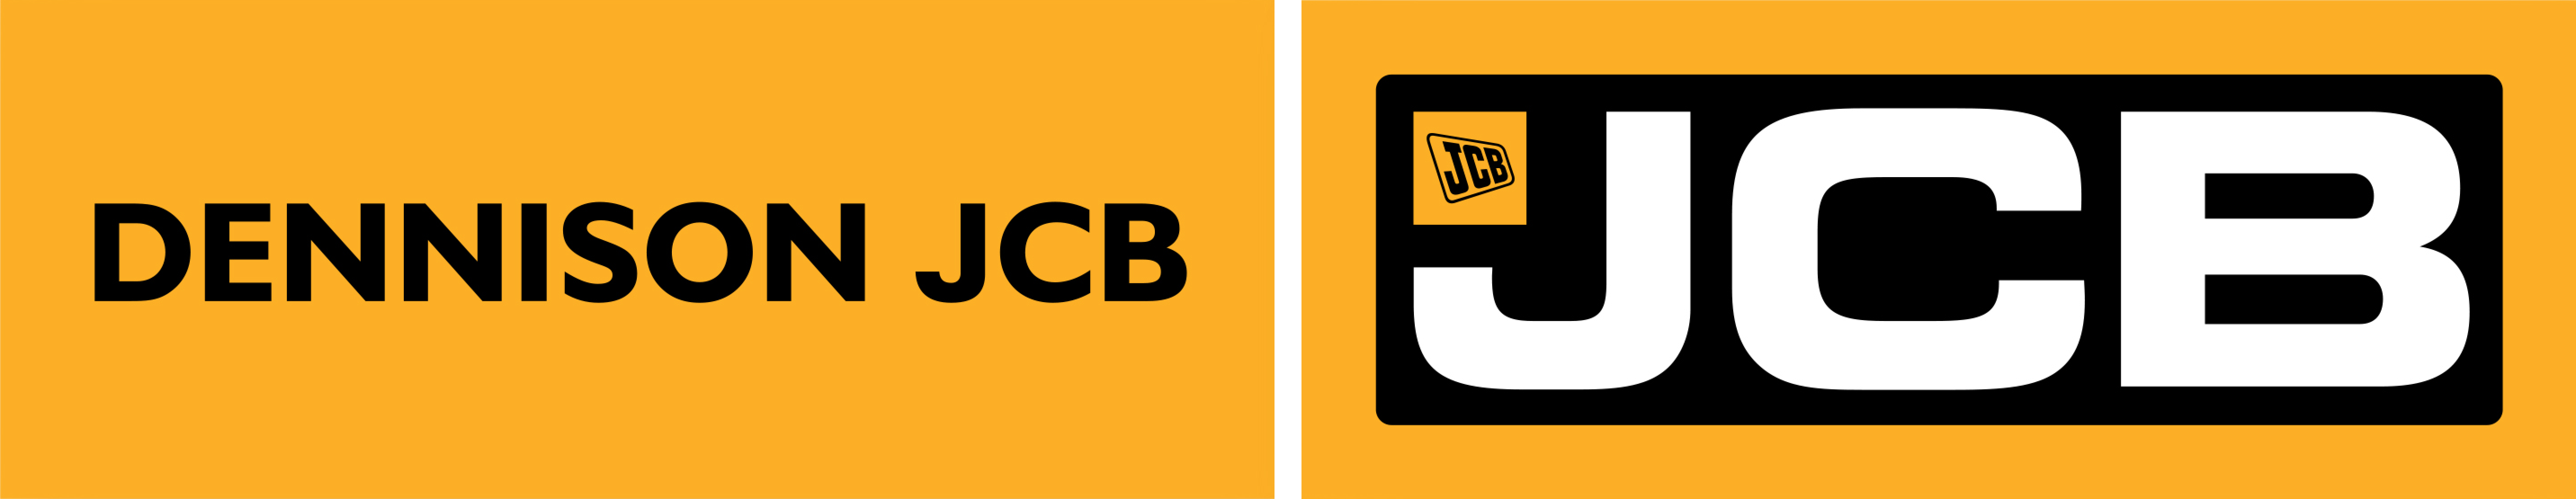 JCB 8008 available on operating lease from £300+VAT per month